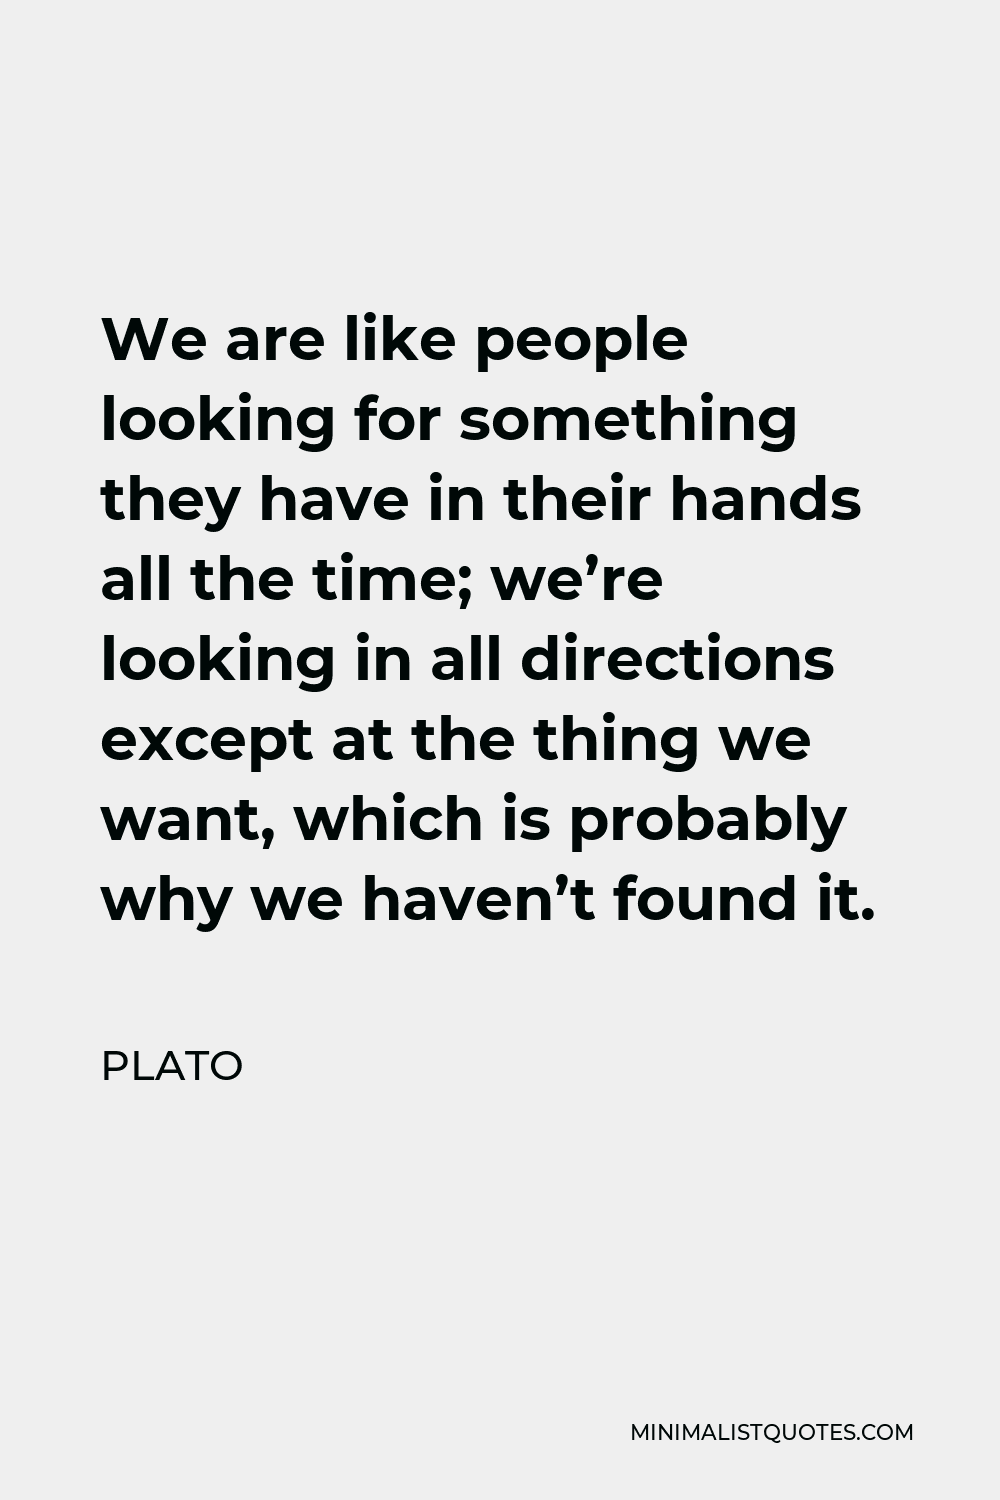 Plato Quote - We are like people looking for something they have in their hands all the time; we’re looking in all directions except at the thing we want, which is probably why we haven’t found it.